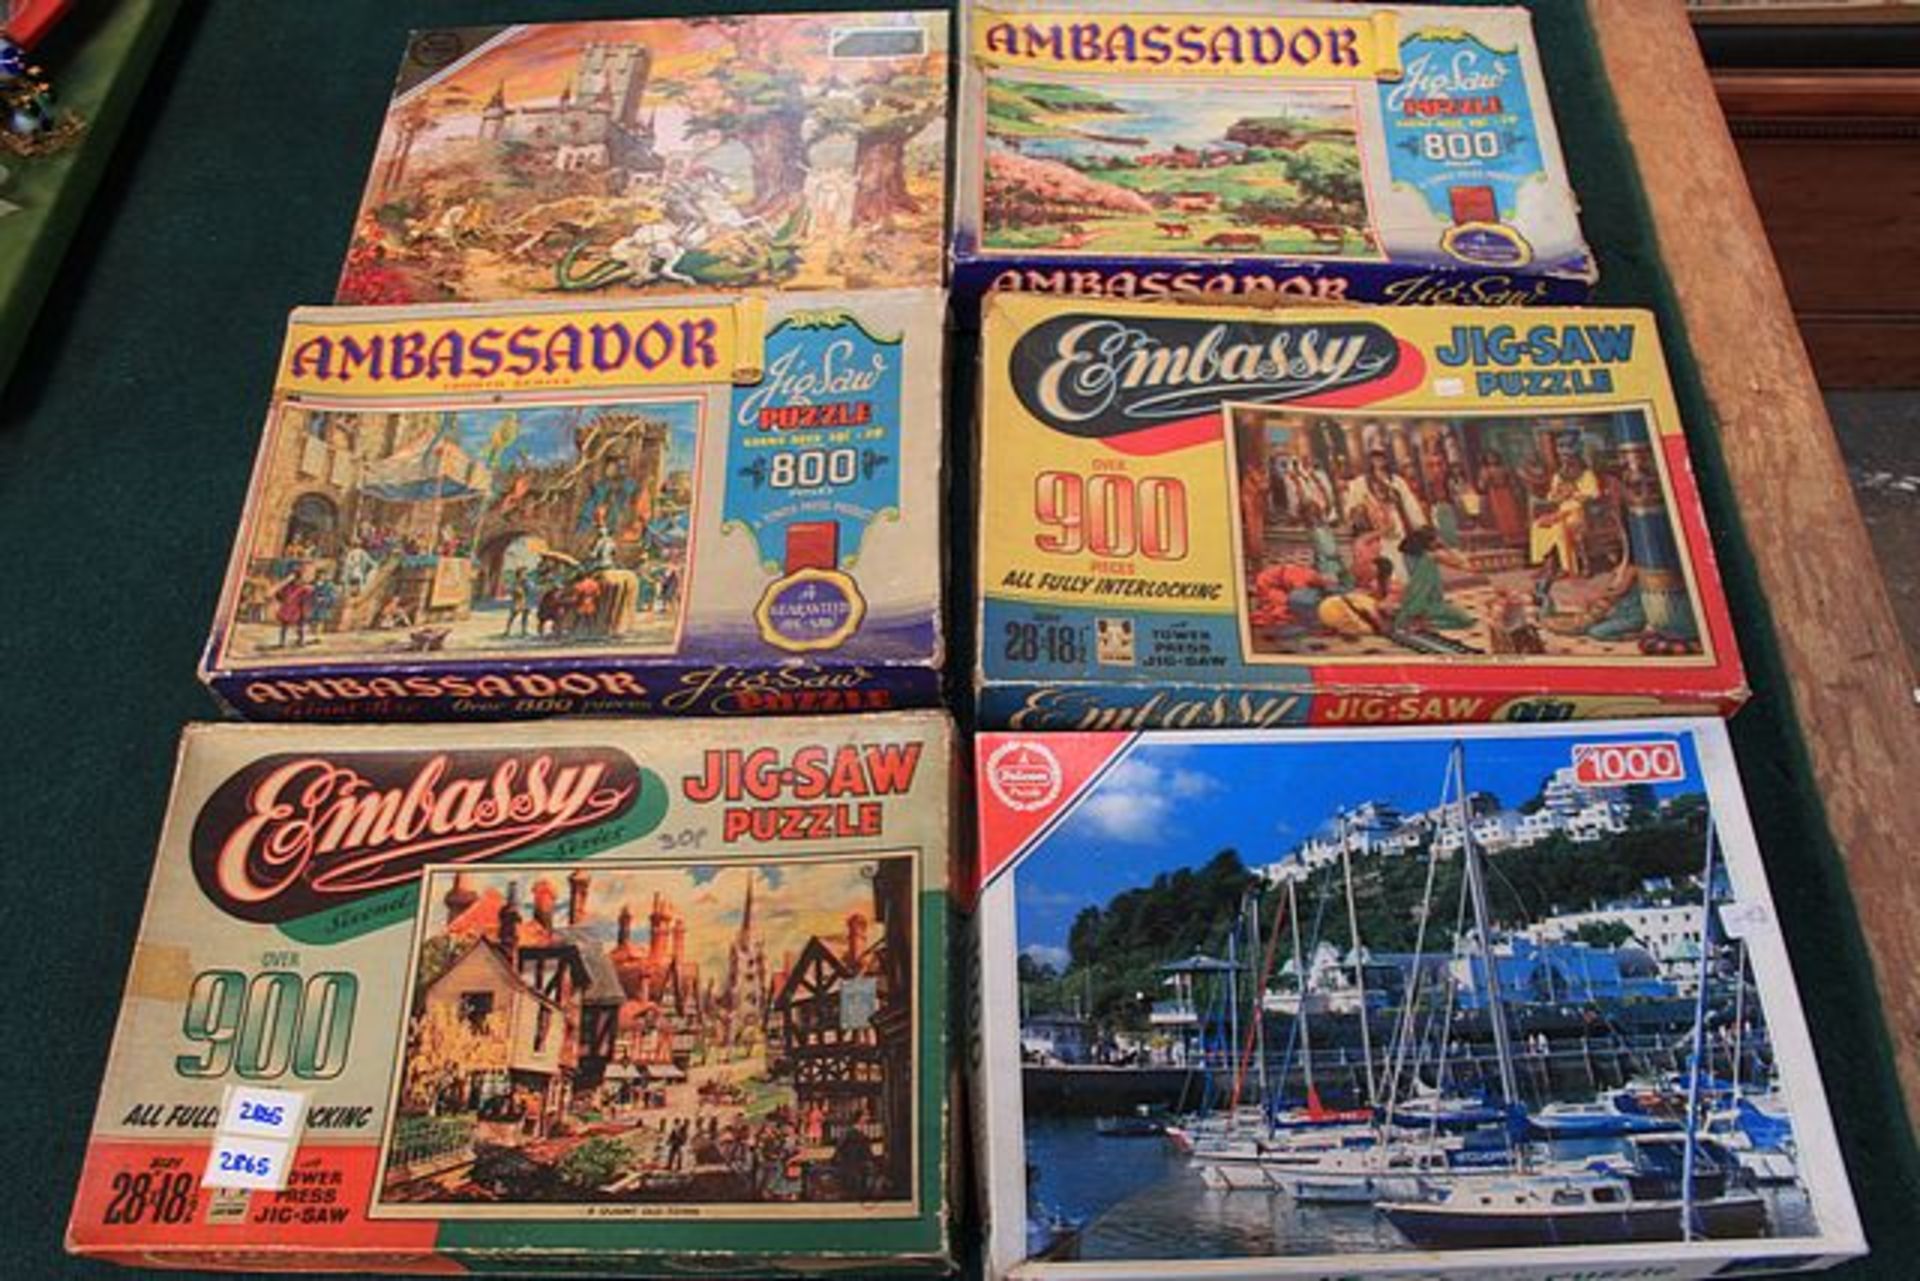 6 X Various Jigsaw Puzzles Comprising Of 1x750 Piece, 2x800 Pieces, 2x900 Pieces And 1x1000 Piece